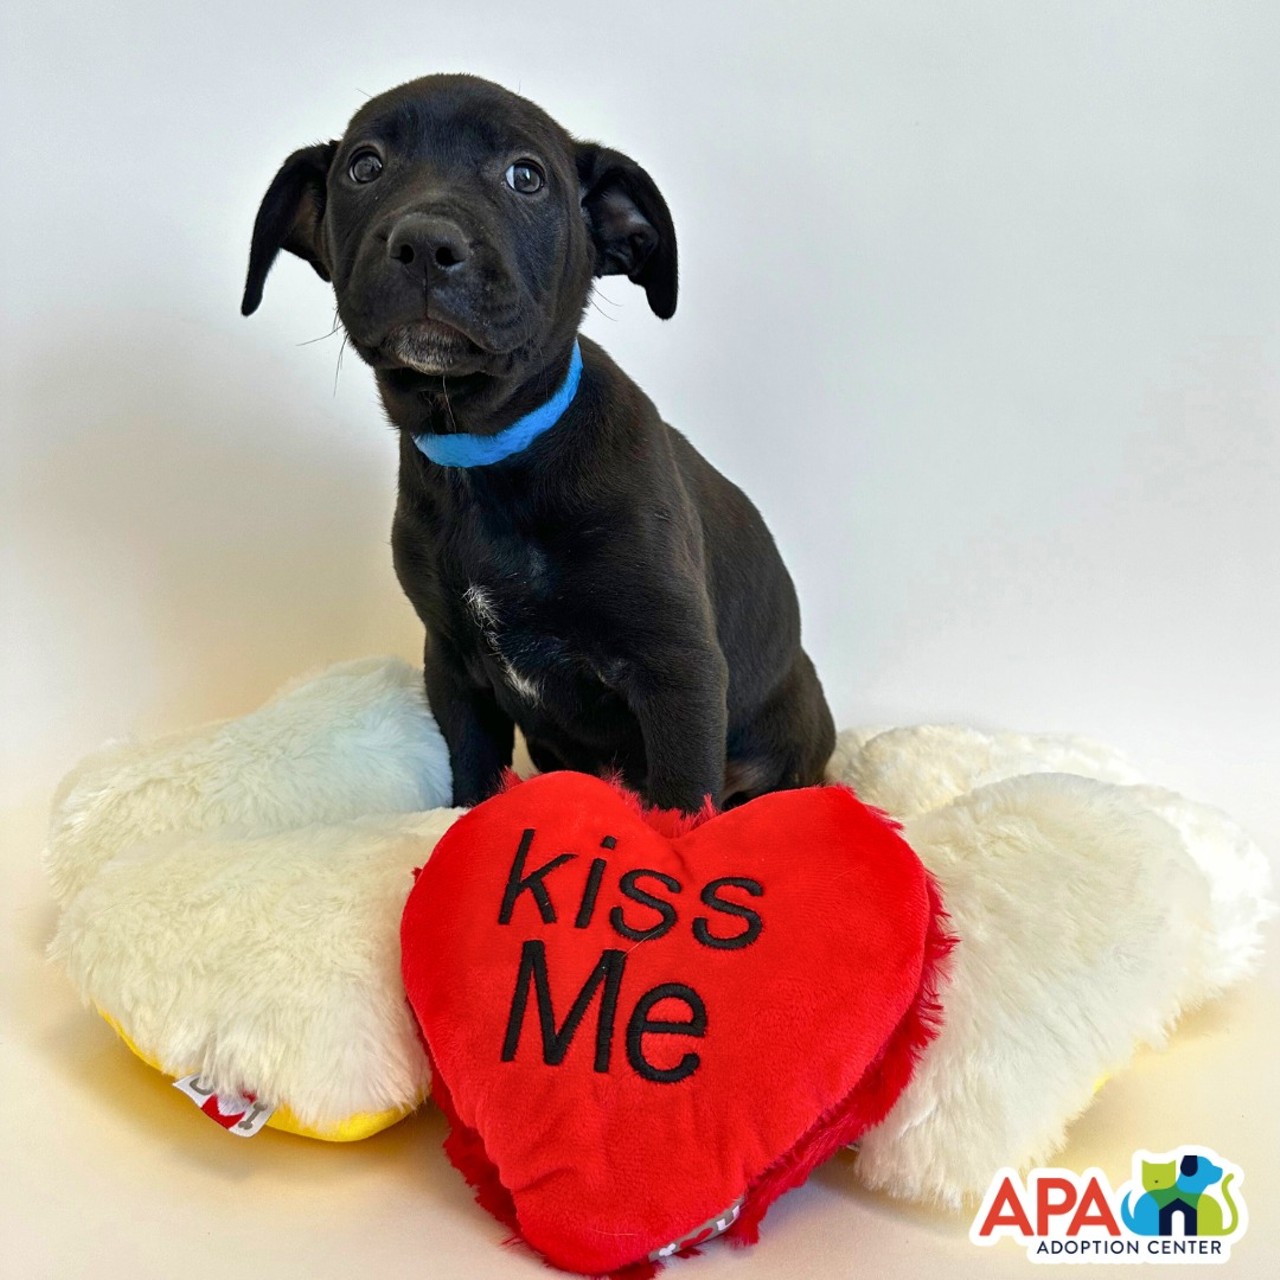 Sweethearts &amp; Snuggles
Spend Valentine&rsquo;s Day at the Animal Protective Association of Missouri (1705 South Hanley Road, Brentwood) for a one-of-a-kind date night that includes cuddles and playtime with adoptable pets, cocktails and hors d&rsquo;oeuvres. From 5 to 7 p.m., this 21-and-older event will allow you and your loved one to create heartwarming memories with some furry friends. Tickets are $40 and can be purchased on Eventbrite&rsquo;s website.